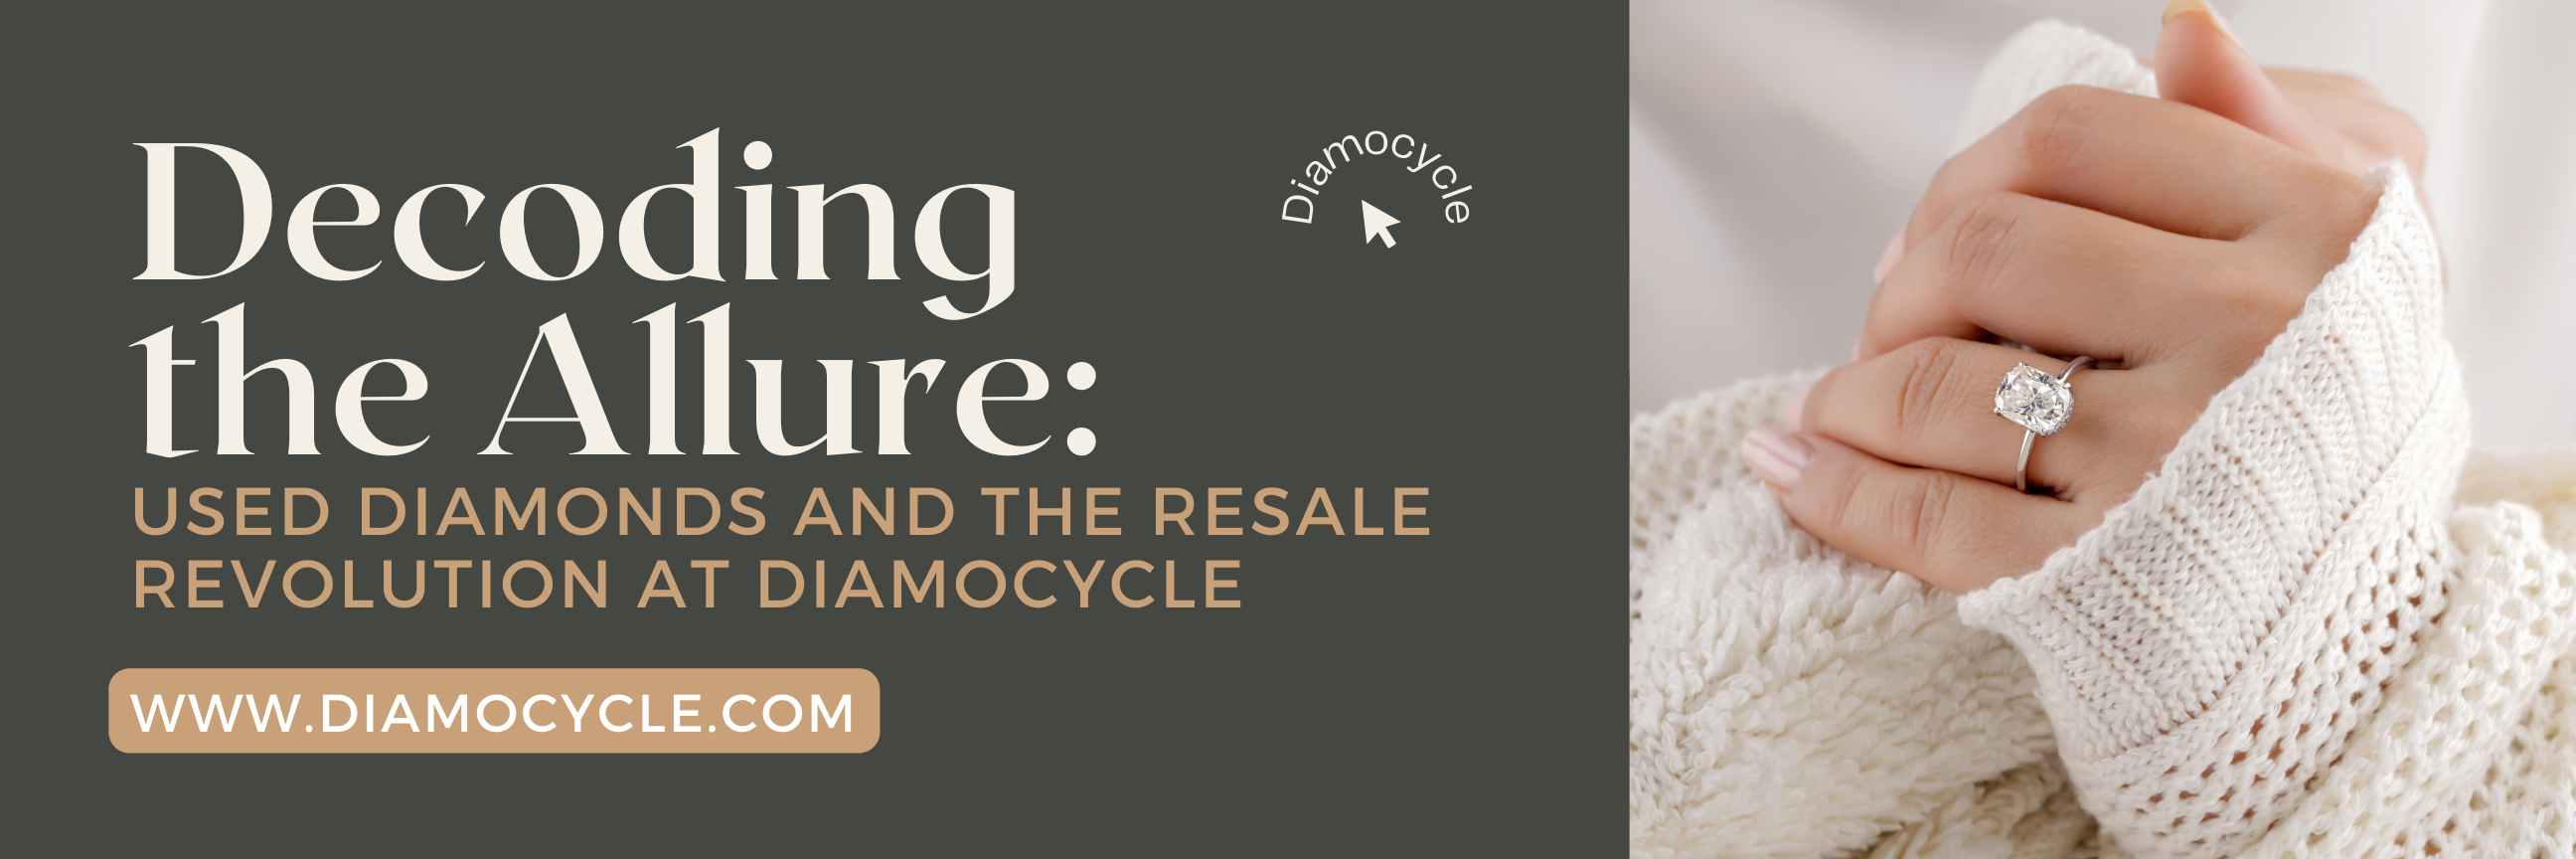 Decoding the Allure: Used Diamonds and the Resale Revolution at Diamocycle